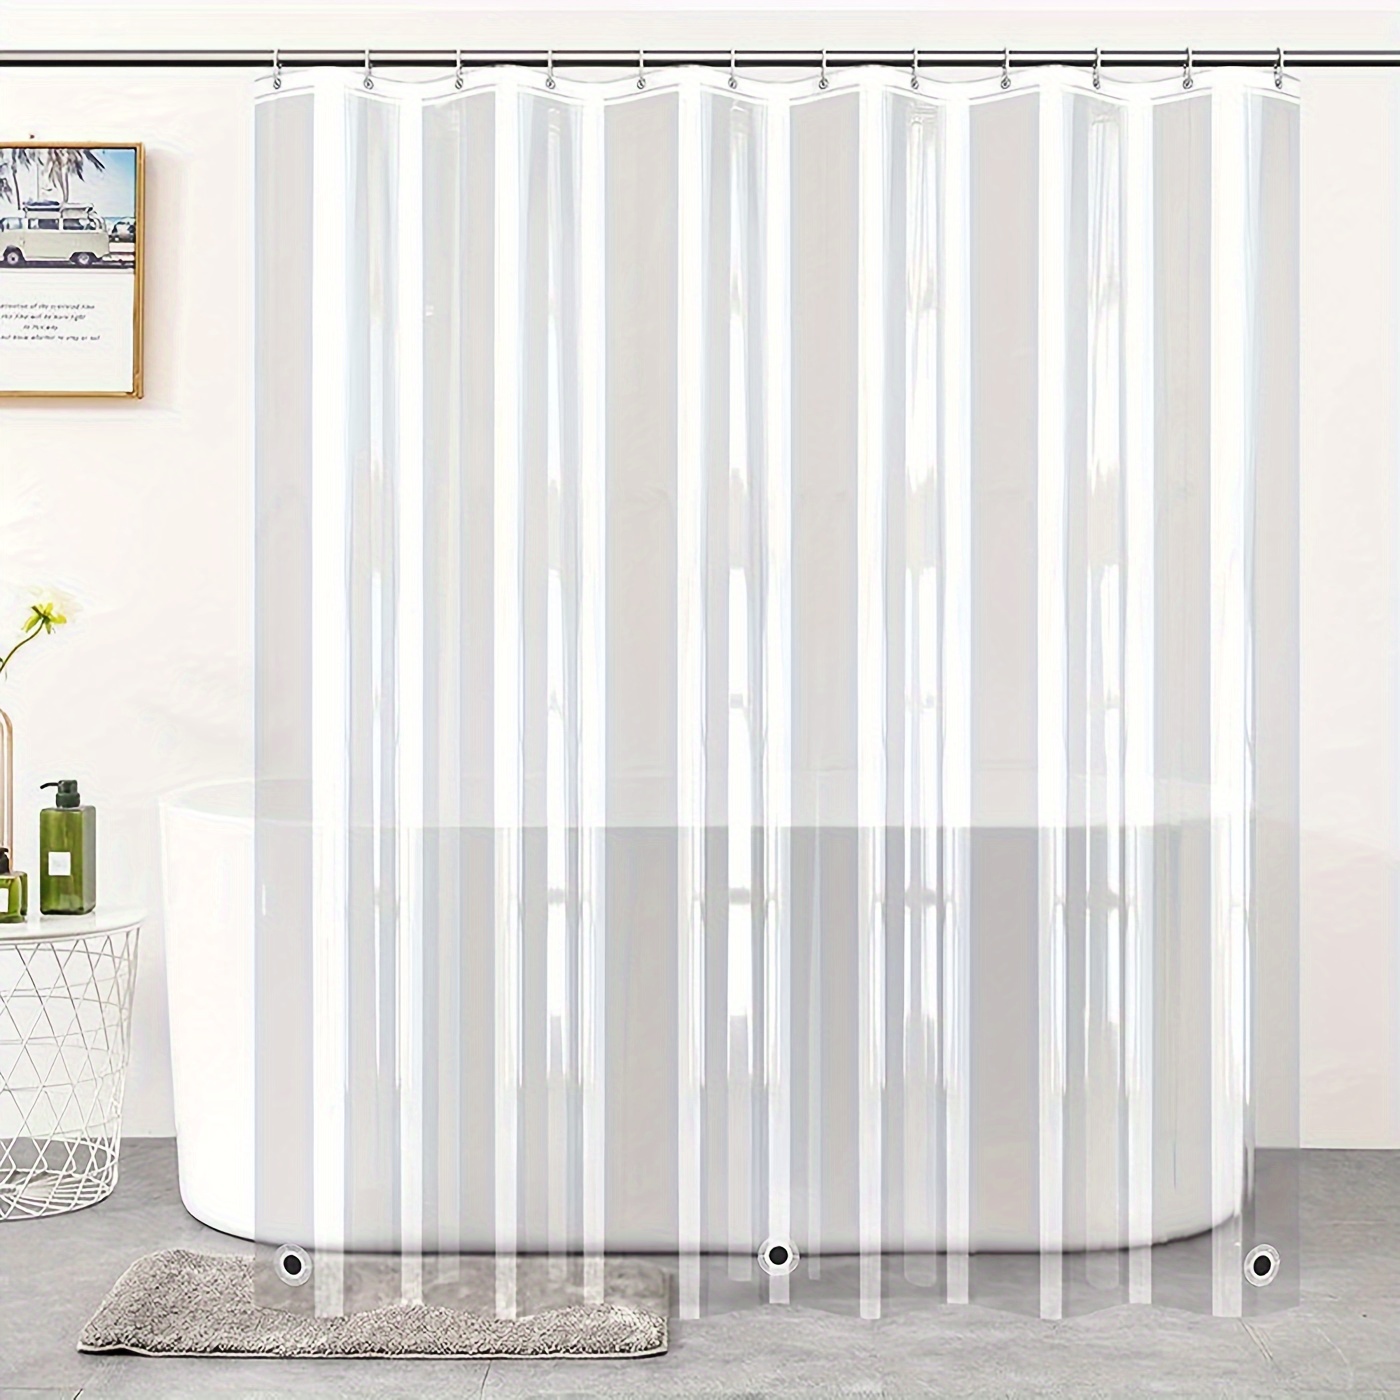 

1pc Peva Heavy Duty Clear Shower Curtain, Waterproof Heavy Weight Thick Bathroom Curtain With Magnet And 12 Rustproof Grommet Holes, Bathroom Accessories